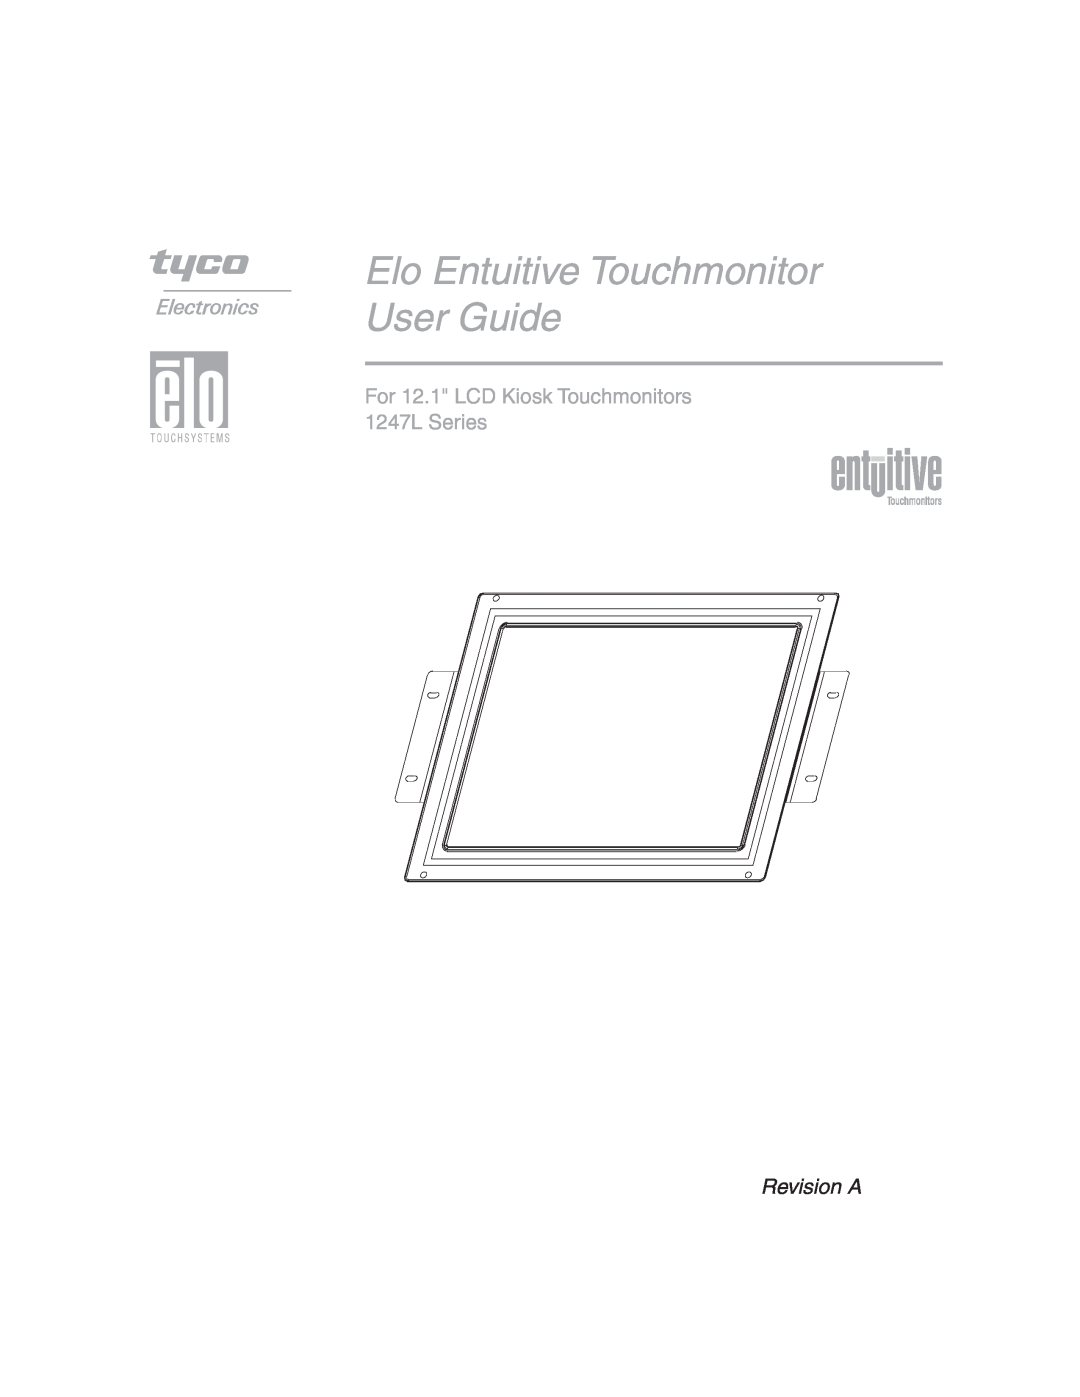 Elo TouchSystems manual Elo Entuitive Touchmonitor User Guide, For 12.1 LCD Kiosk Touchmonitors 1247L Series 